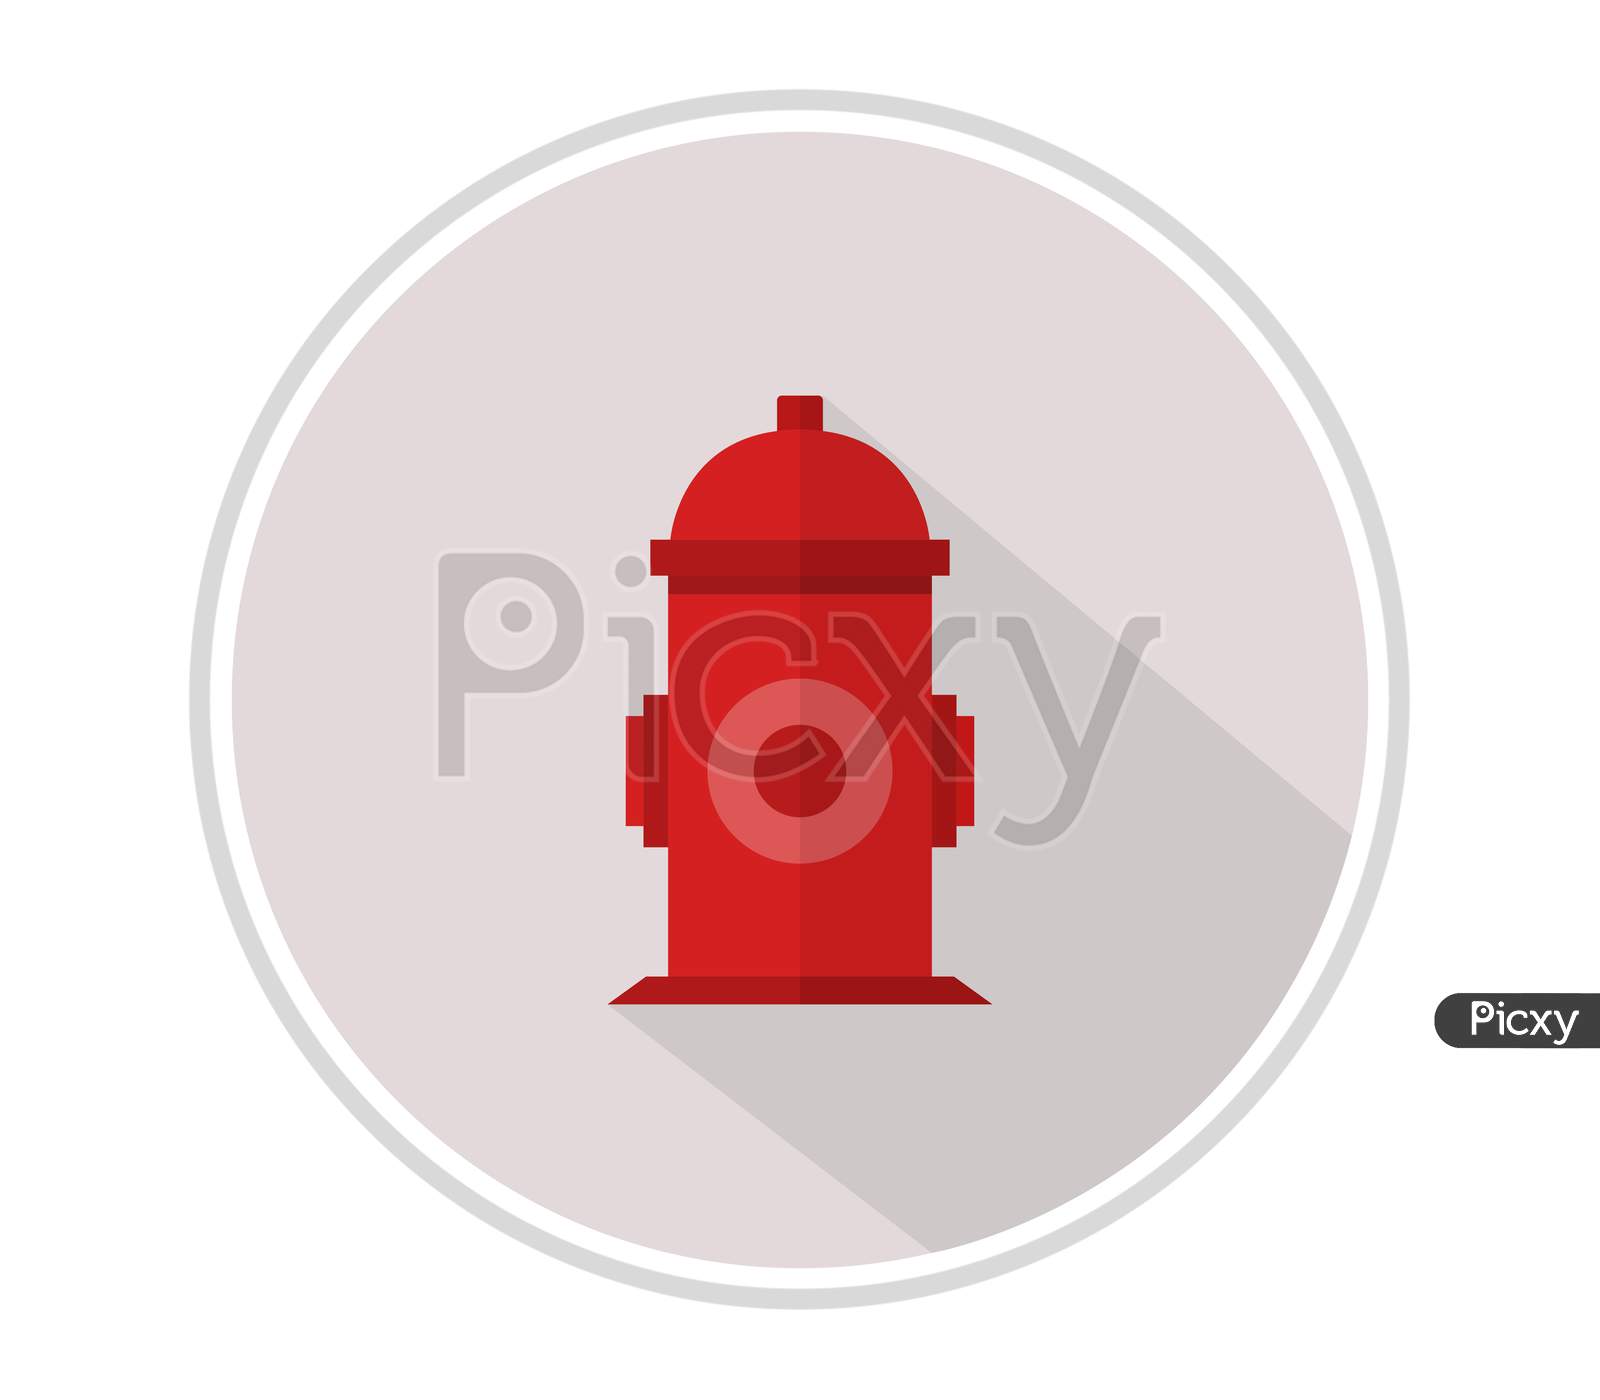 Hydrant Icon Illustrated In Vector On White Background